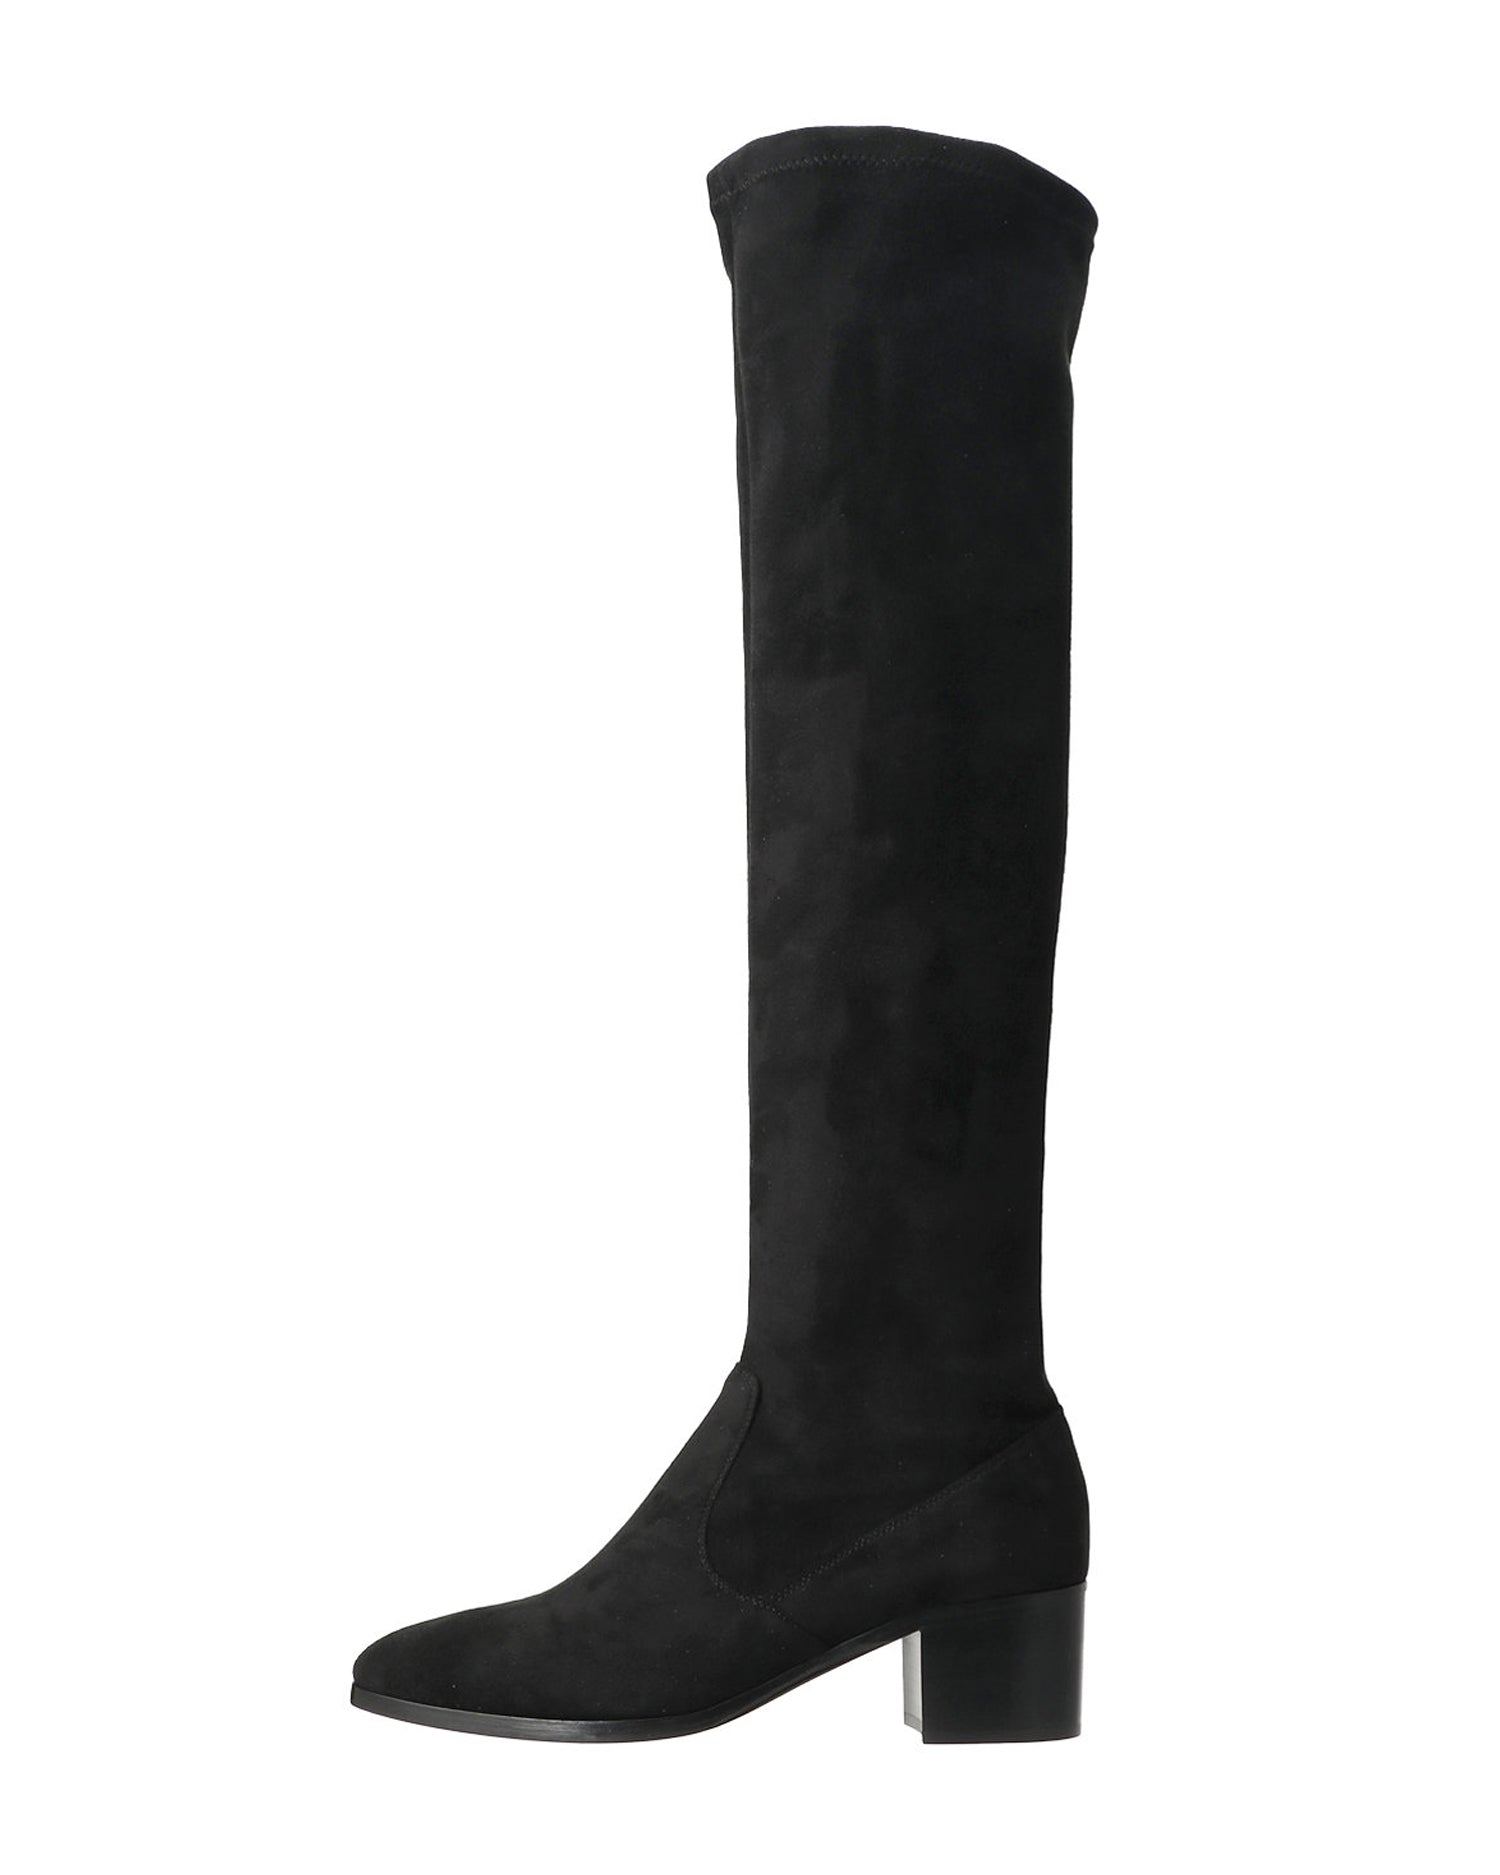 FABIO RUSCONI for AMARC stretch knee high boots